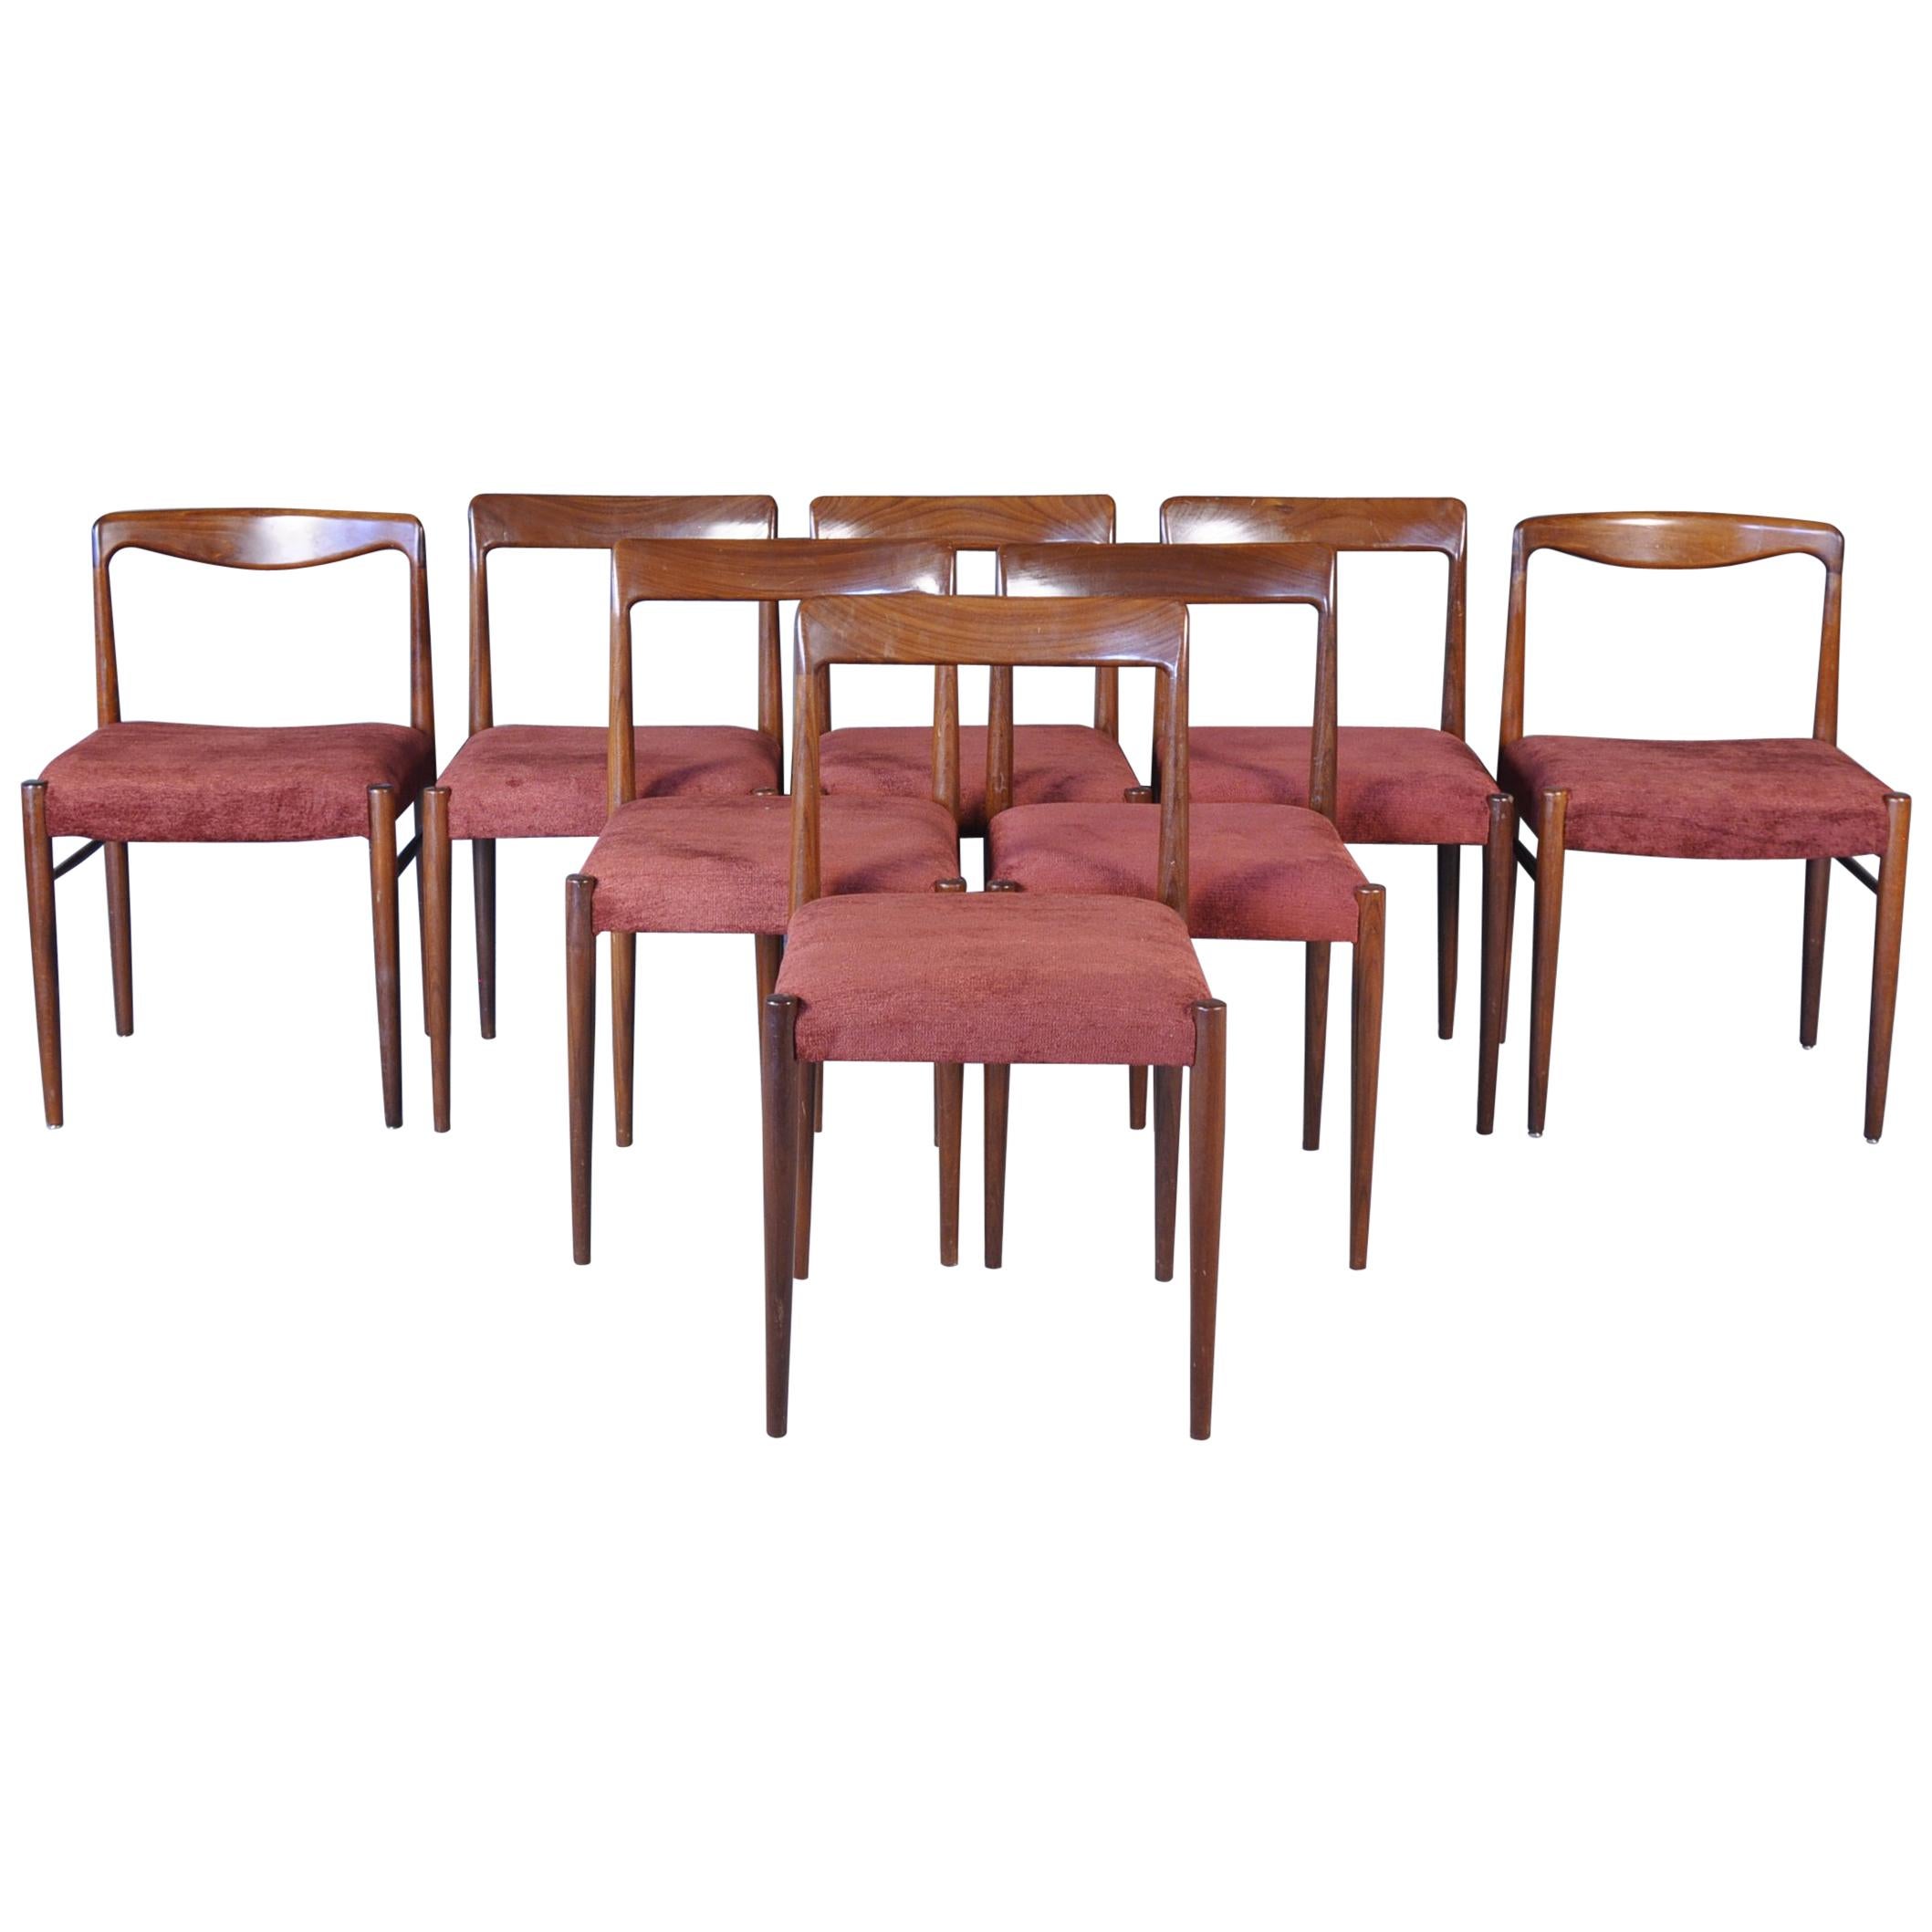 Mid-Century Modern Rosewood Dining Chairs from Lübke, 1960s, Set of Eight